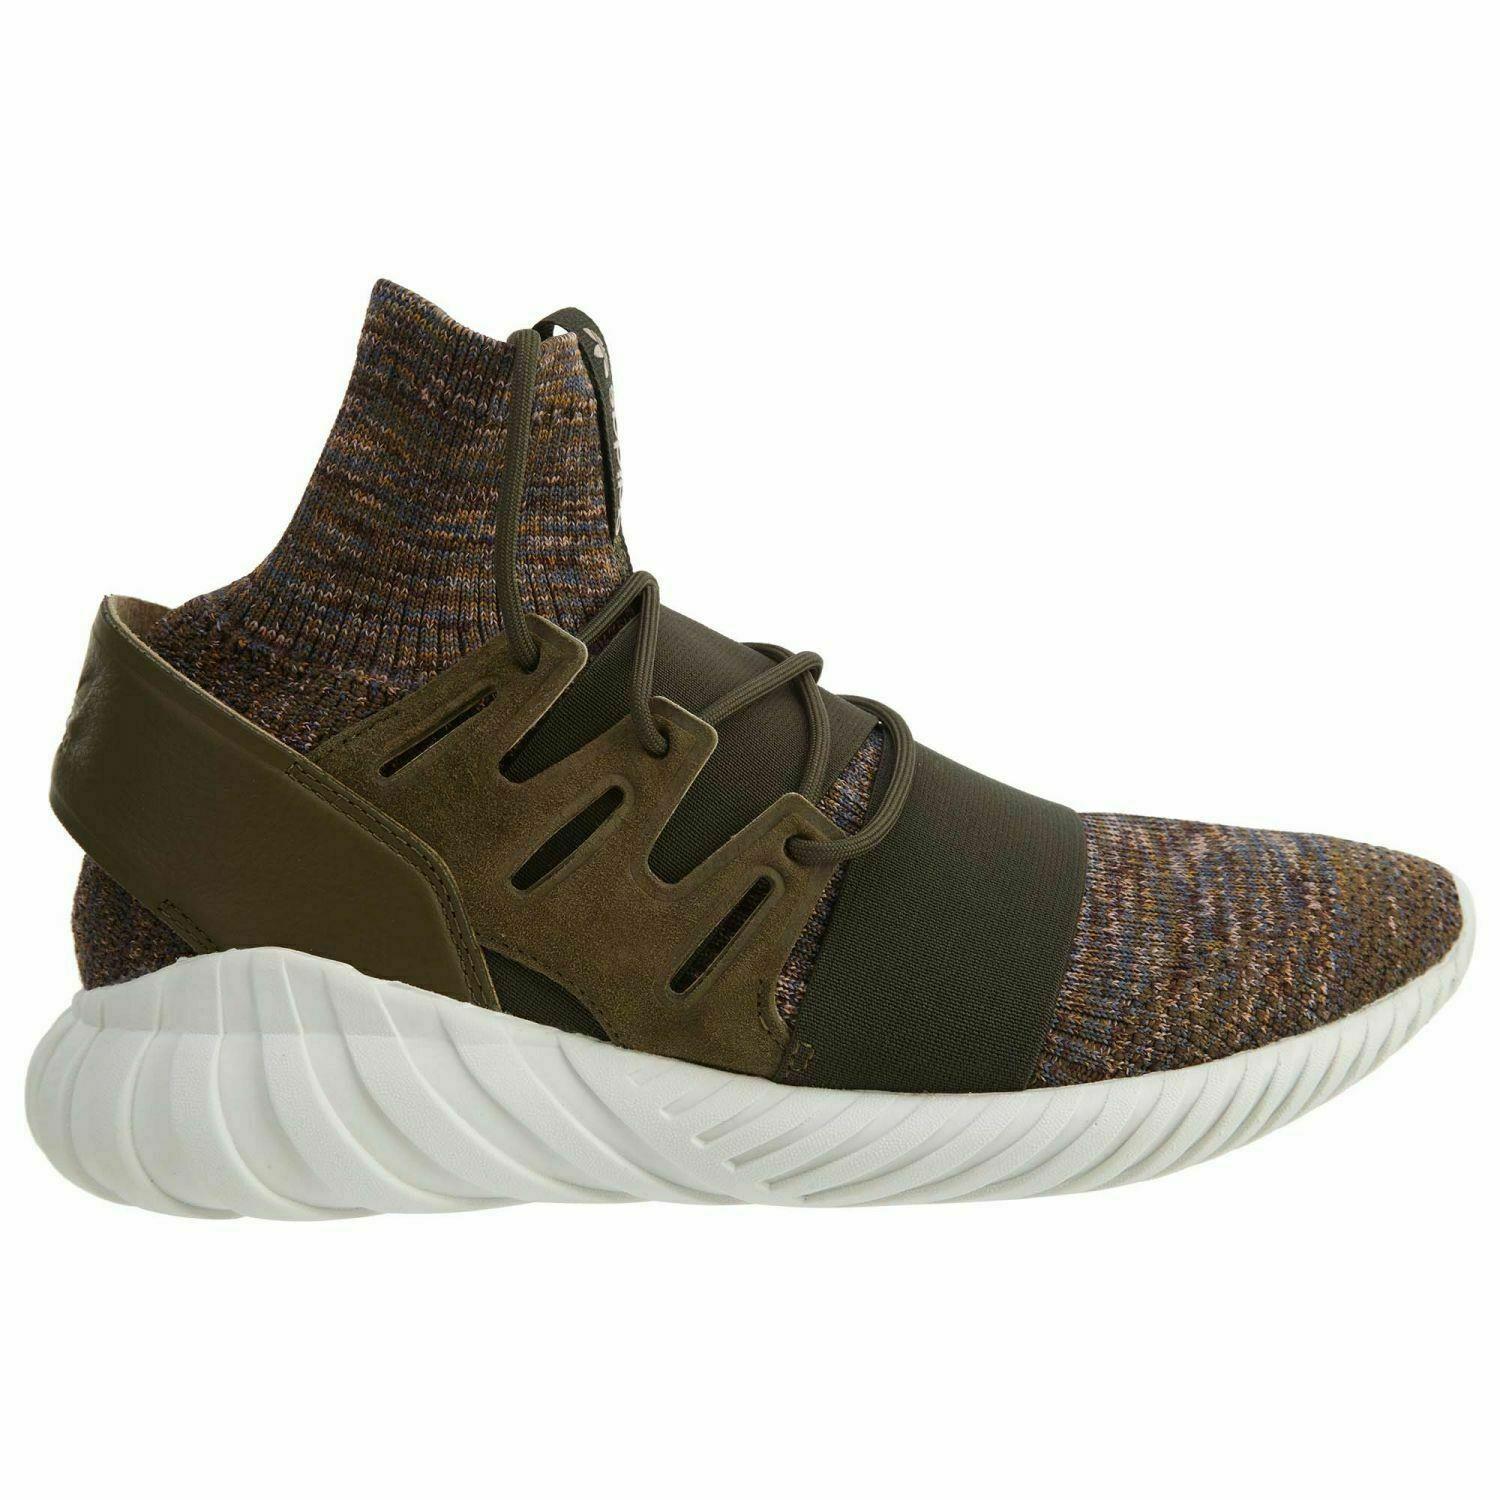 Adidas Tubular Doom PK Mens BY3551 Trace Olive Brown Primeknit Shoes Size 8 - Brown , Crystal White Manufacturer